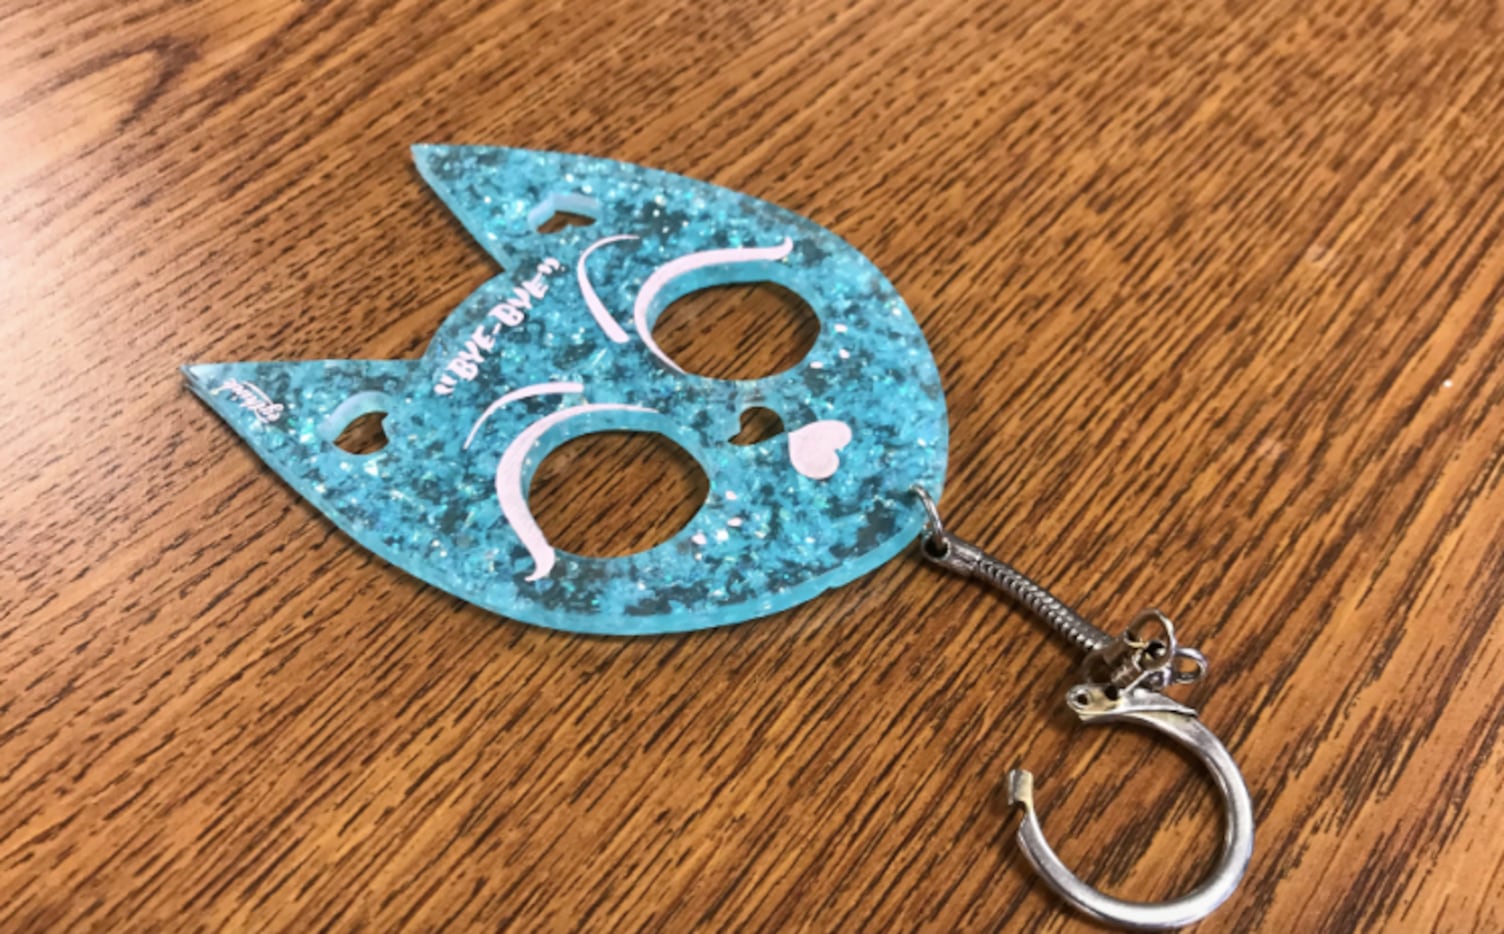 Texas to Lift Ban on Brass Knuckles and 'Kitty Keychains' on September 1, San Antonio